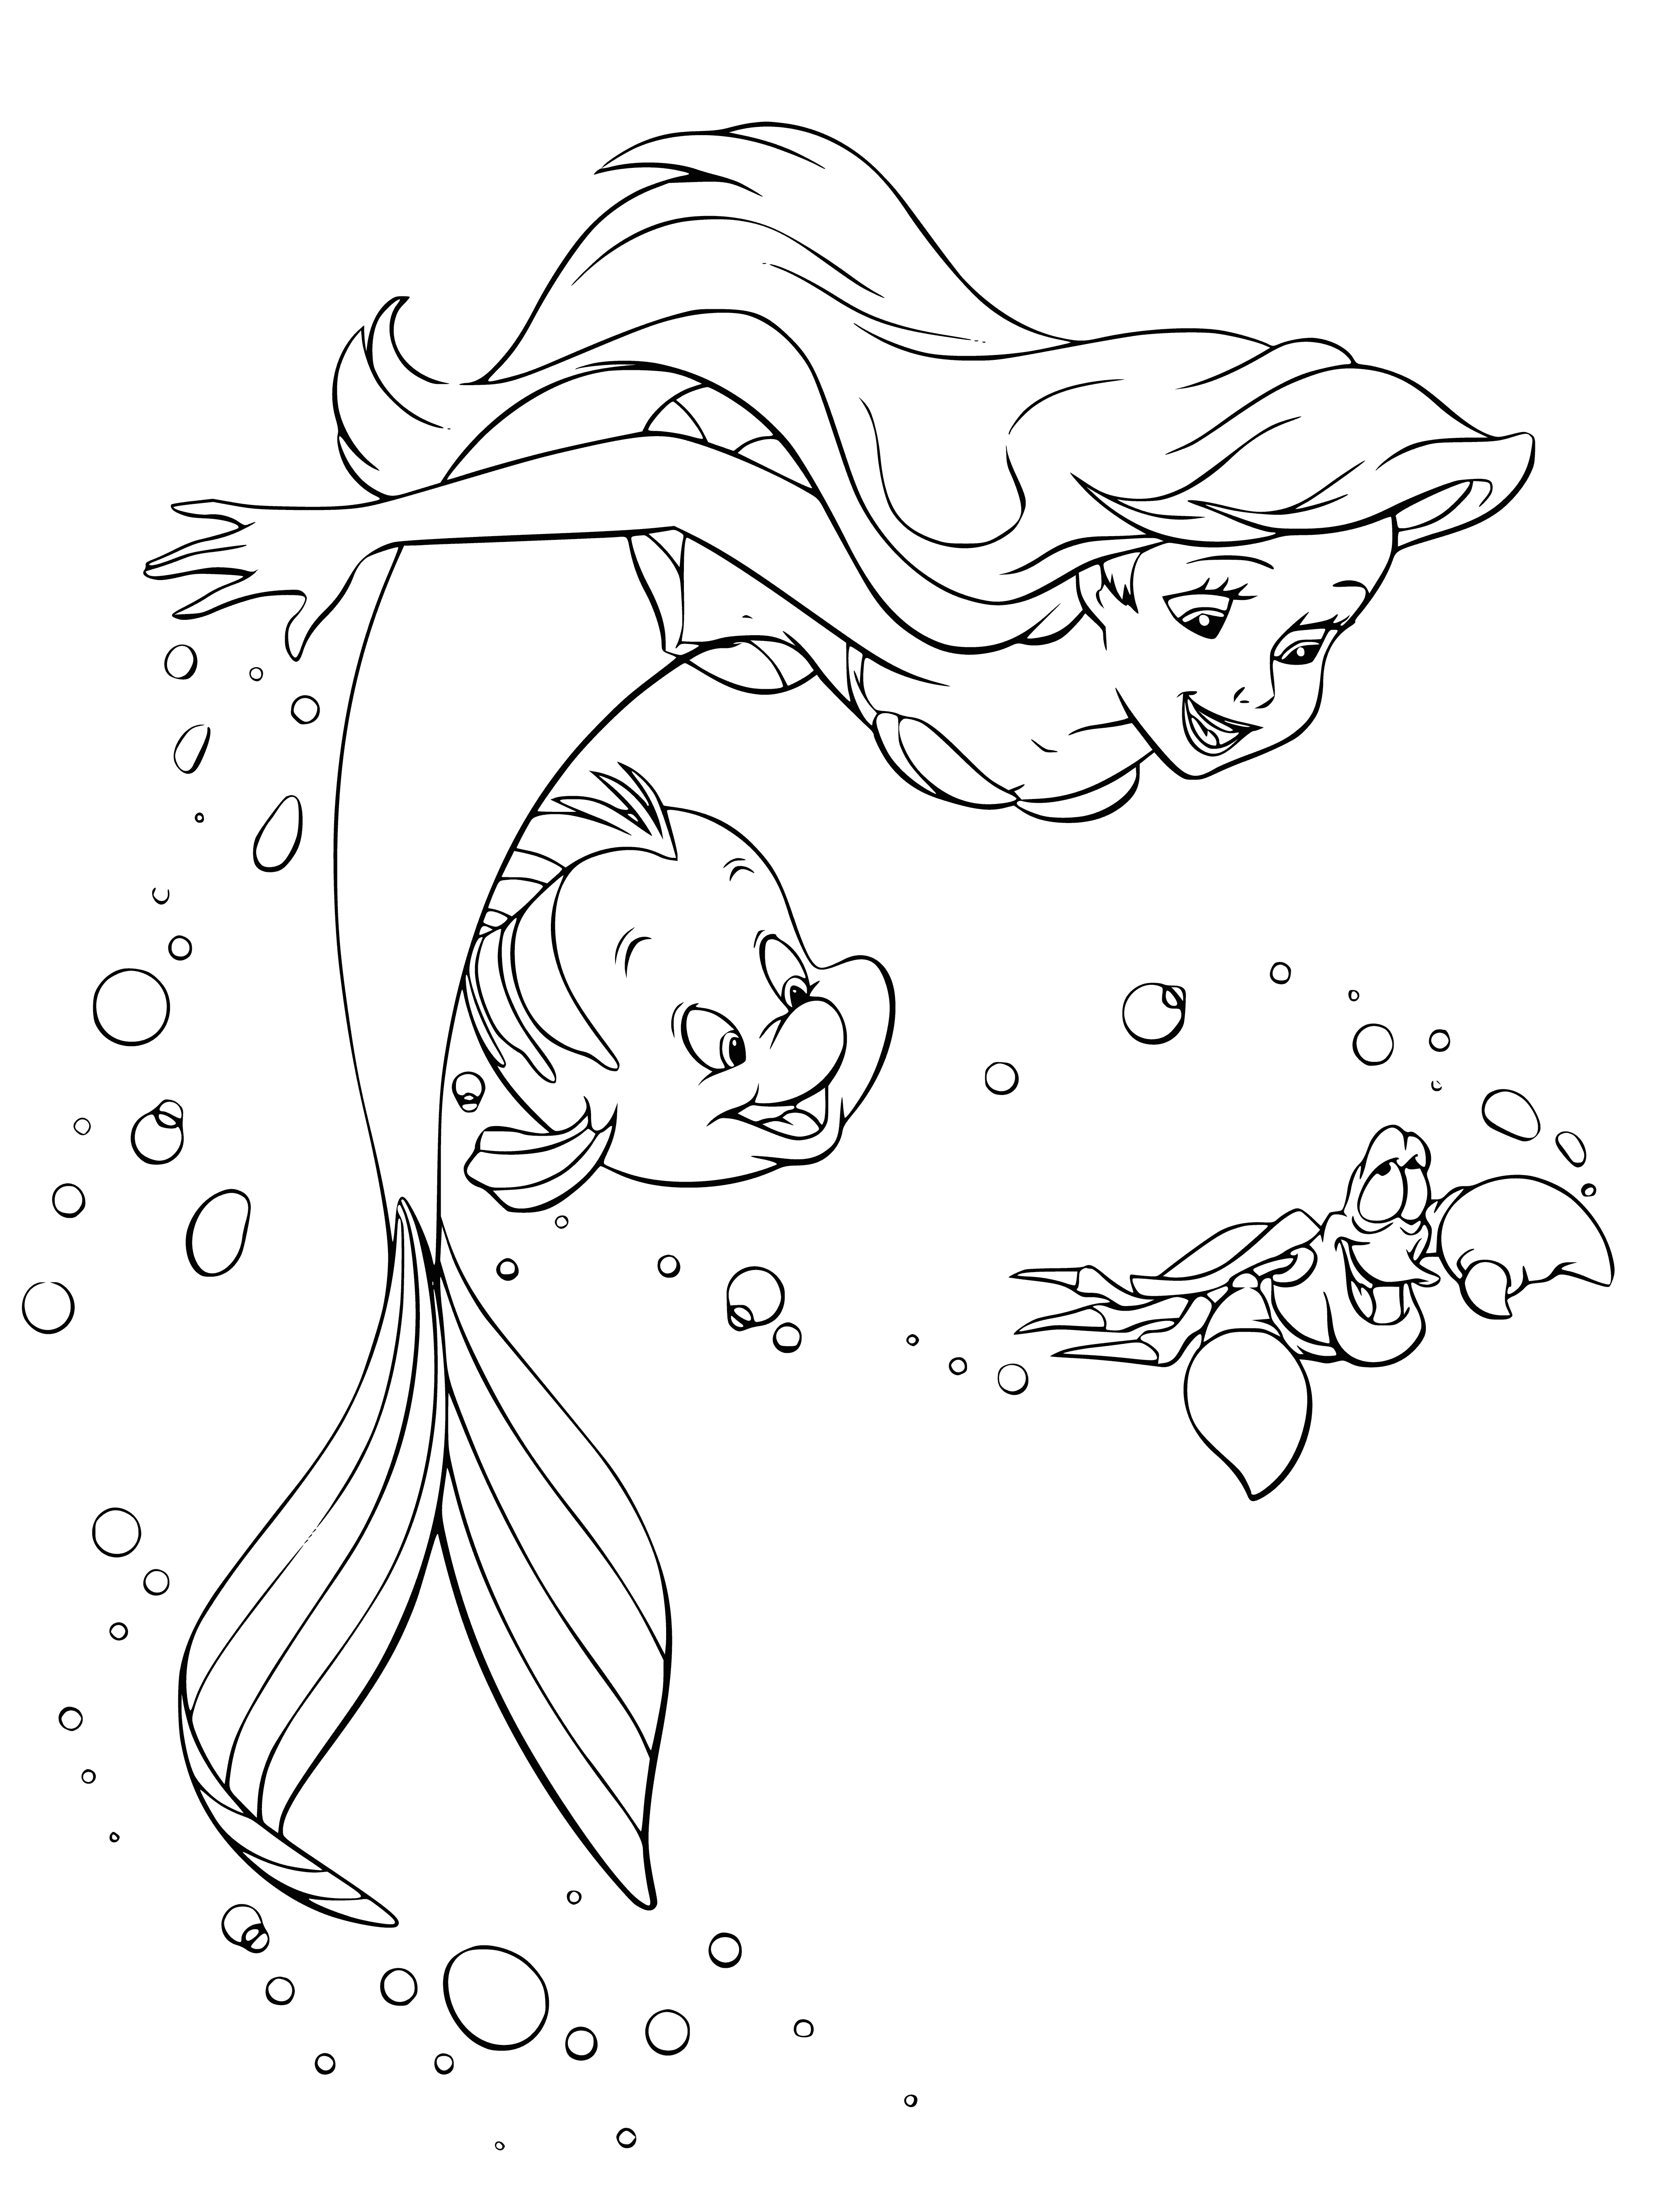 Ariel with friends coloring page